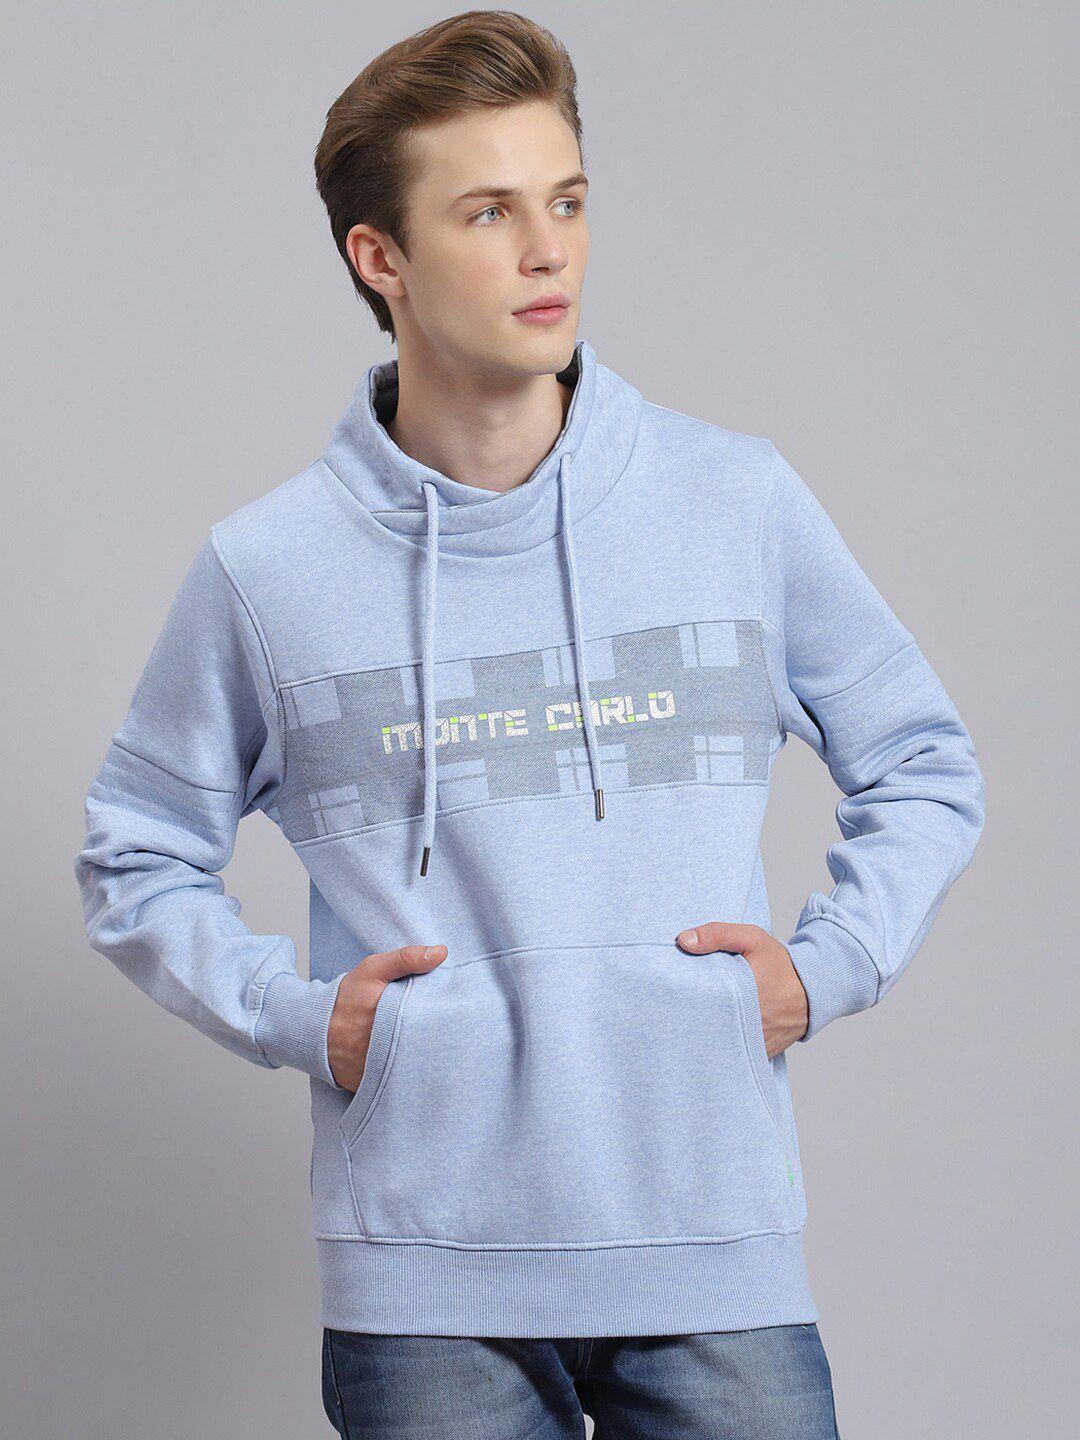 monte carlo typography printed turtle neck pullover